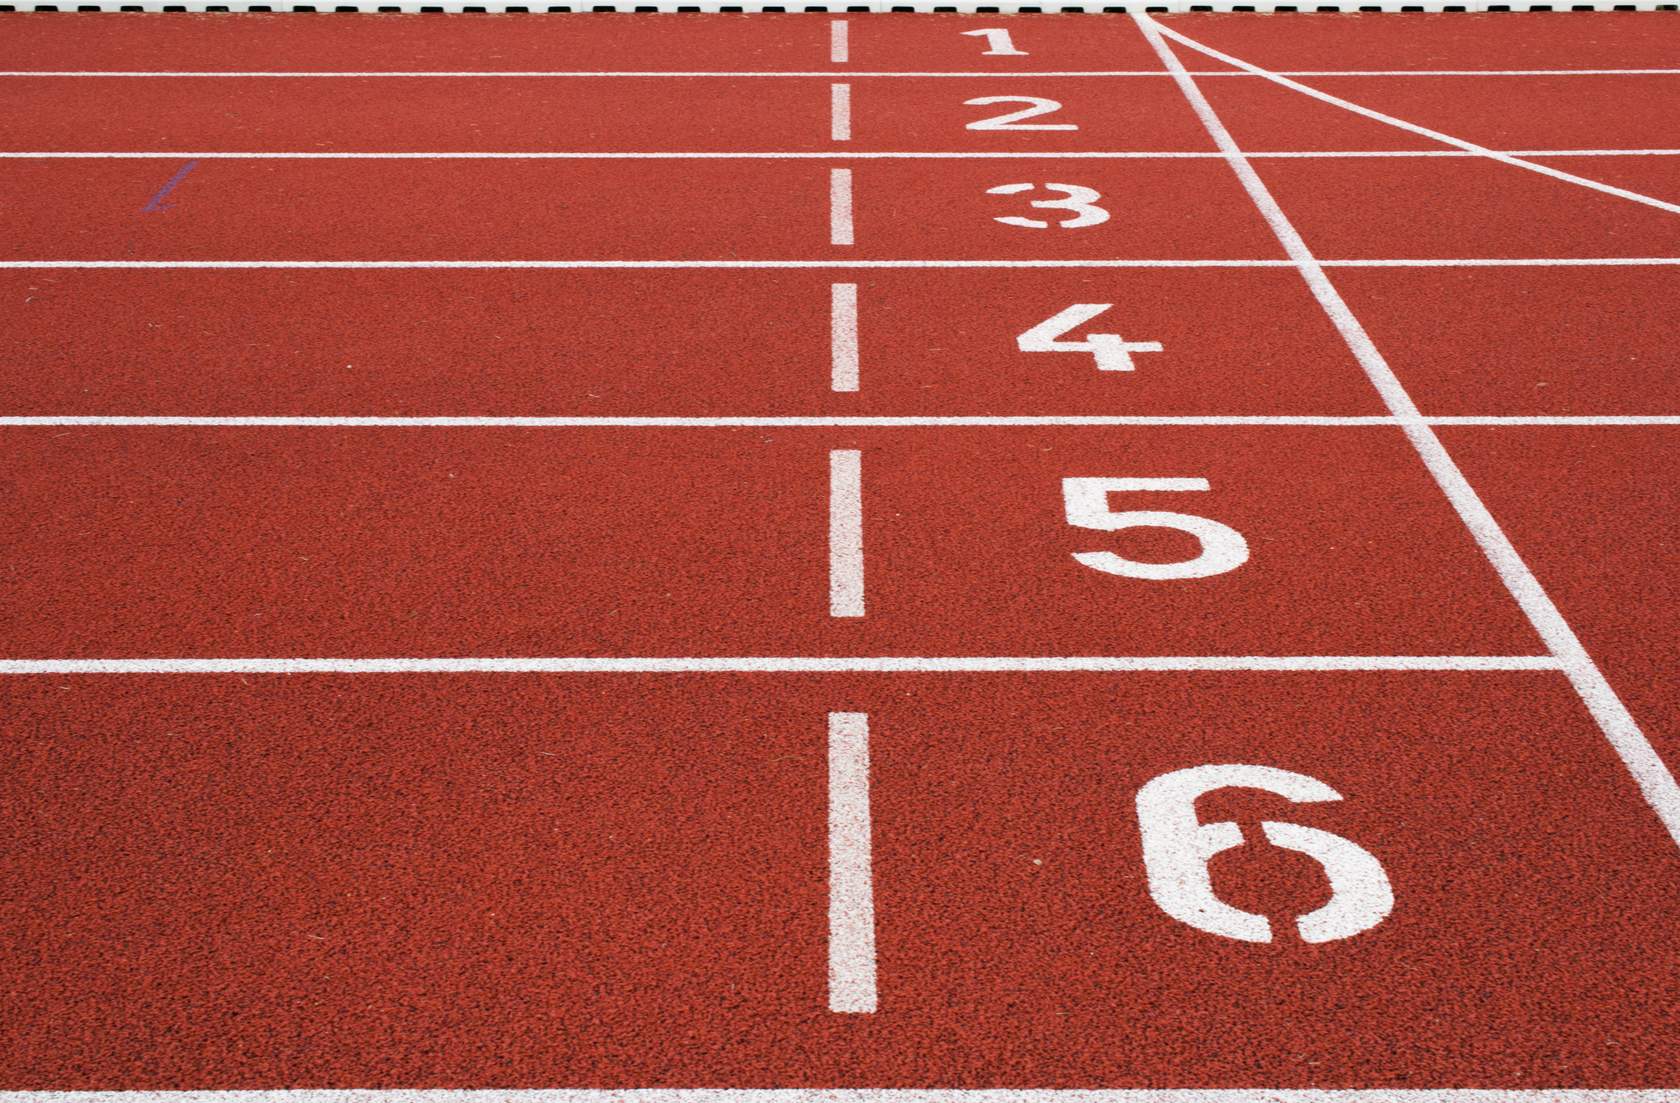 An image of a running track with numbers on it representing a derived stimulus relation example.